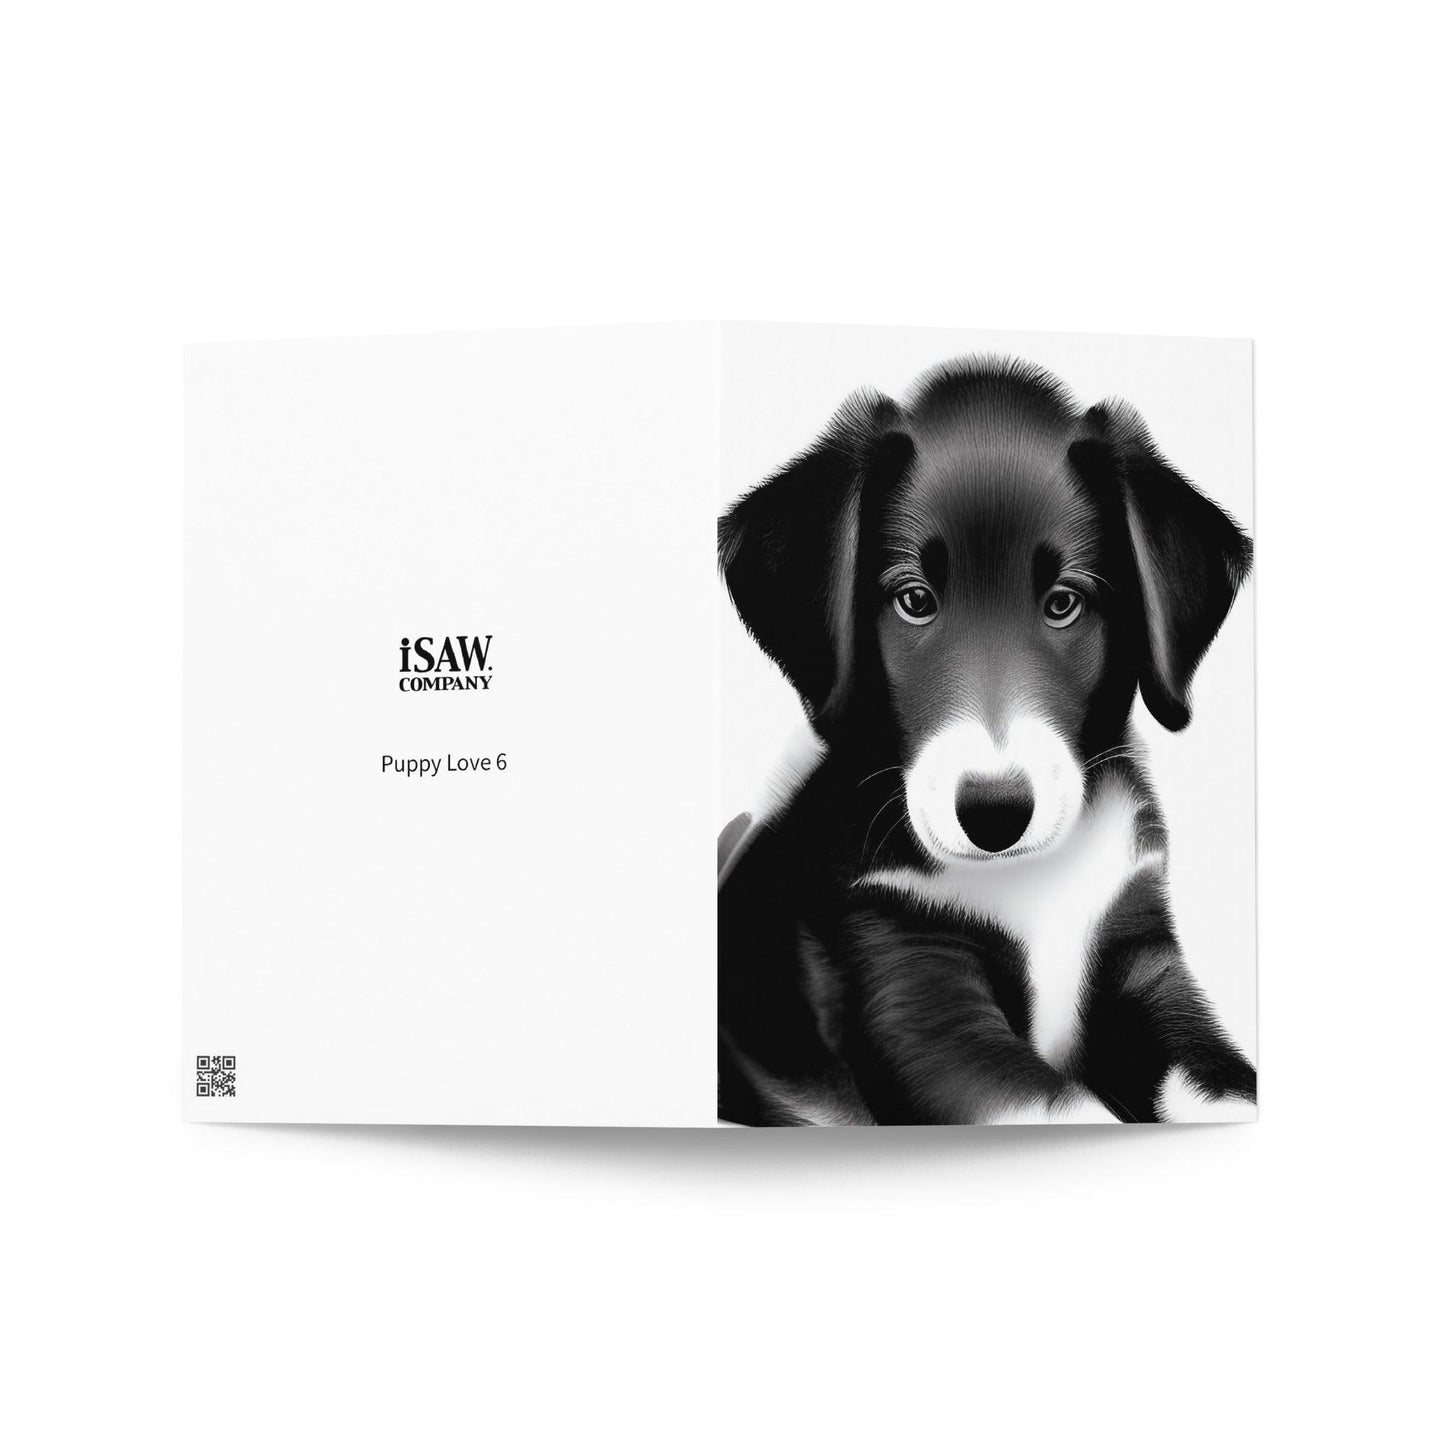 Puppy Love 6 - Note Card - iSAW Company